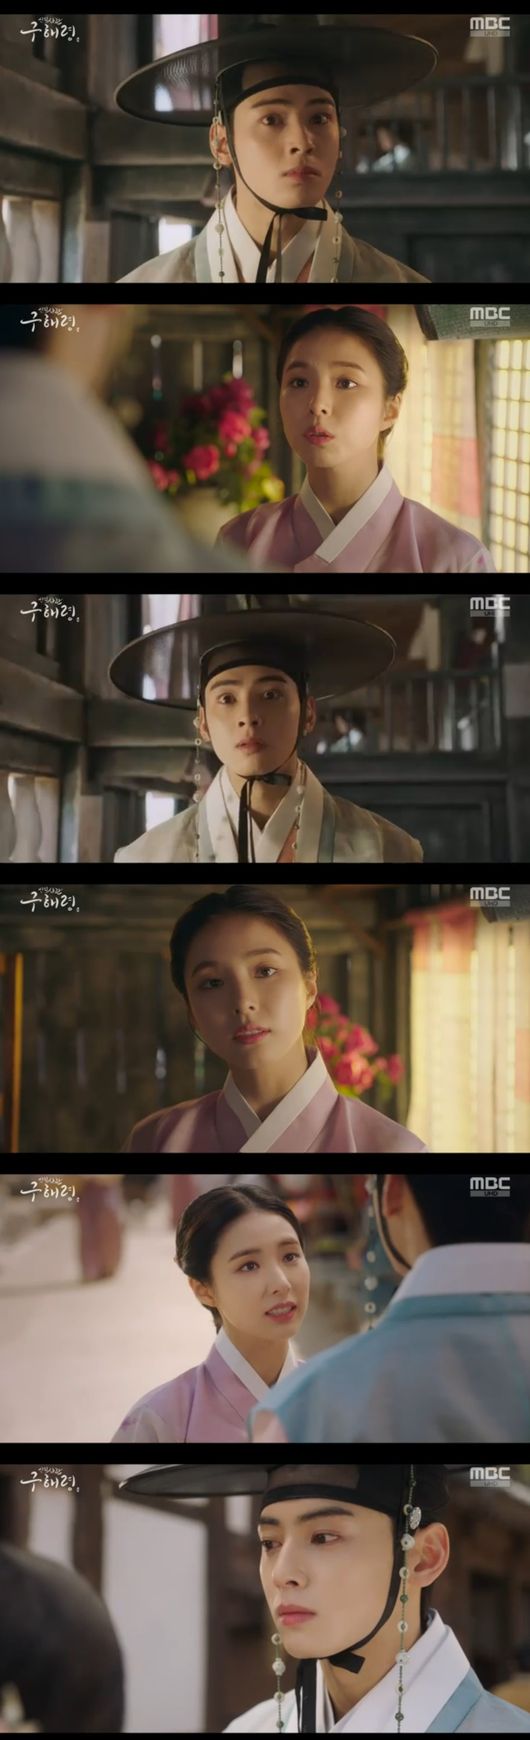 Shin Se-kyung, who was posing as Jung Eun-woo in the new cadet, was spotted. It was an intense meeting.Na Hae-ryung (Shin Se-kyung) and Lee Lim (Jung Eun-woo) were drawn in the MBC drama Na Hae-ryung (directed by Kang Il-soo, Han Hyun-hee, and the playwright Kim Ho-soo) which was broadcast on the 17th.In the early 19th century, it opened in the form of Hanyang in Joseon; Na Hae-ryung (Shin Se-kyung) was living a life of reading novels while walking around the house of Yangban with book expenses.But if you do not like the people, you live in a state of being kicked out because you do not have a book.Lee Lim (Jung Eun-woo) was curious about love by watching his beloved courtesan and eunuch with his life; he spent Haru writing a novel about love.Na Hae-ryung was distressed by the uninterested bridal lessons.Na Hae-ryung told his brother, I do not want to marry, and said, I want to live with my brother all day reading books.But when I had the opportunity, I had to find the right opponent, Na Hae-ryung said, It does not sound so sweet, he said. I do not think about sending a bad product, do not think about sending it anywhere.In the meantime, the order to eliminate the bad book called Hodam Teacher was dropped in the city.Na Hae-ryungs Orabi ordered, I must hurry to marry Na Hae-ryung, leave a letter in the house last time.The next day, Irim began his morning writing a novel about love, and decided to go out with a novel written by him, saying, I wonder if people like my writing.At this time, the name was encountered by his brother Lee Jin (Park Ki-woong); Irim hurriedly hid himself, but Lee Jin recognized it and allowed him to go out.On the day the novel Secret Affair was published, Na Hae-ryung was also urgently needed to get a new book.Na Hae-ryung asked me to give me a job, but I stopped paying for the book.At the end of the twists and turns, Na Hae-ryung got his hand on the Plums Secret Affair book, which Irim was delighted to see in front of his eyes as he lined up to see his book.I checked my book by myself in the study.At this time, Irim was at first sight when he saw Na Hae-ryung looking at his book. He approached Na Hae-ryung with his heart, but Na Hae-ryung yawned, The book is too boring.Irim desperately followed Na Hae-ryung, and soon he said, Only Poco Rosso is visible in the eyes of Porco Rosso.Na Hae-ryung said, I will forgive you at this point, I have taken my precious time rudely. Do you give a fever to the novel of salt?Lee said, The novel of plum is worth writing a novel, but Na Hae-ryung said, If you are suspicious in this way, you will doubt it, and you will doubt it. Lee was embarrassed and said, I am not a plum.The library was in a frenzy with the signature of the plum and the invitation to bring him in, but Kim Seo-bang visited Na Hae-ryung because the plum did not reveal his face directly.He then asked Na Hae-ryung to pretend to be a plum.Na Hae-ryung refused, but Kim Jeong-gyun Skyla Novea document was handed out, and Na Hae-ryung accepted it to save Kim Jeong-gyun Skyla Novea.That night Na Hae-ryung even signed a book to pretend to be a plum, then became a plum artist and read the book, and got a hot response.The book with the signatures was sold at a high price, and the signing ceremony was held.In the meantime, I asked about the contents of the book, but Na Hae-ryung could not answer properly and Na Hae-ryung said, Name pluma is written down.They recognized each other, and were even more surprised.Meanwhile, the new cadet, Na Hae-ryung, is the first problematic first lady () of Joseon and the annals of the Phil full romance by Prince Irim, the anti-war mother Solo.Na Hae-ryung broadcast screen capture